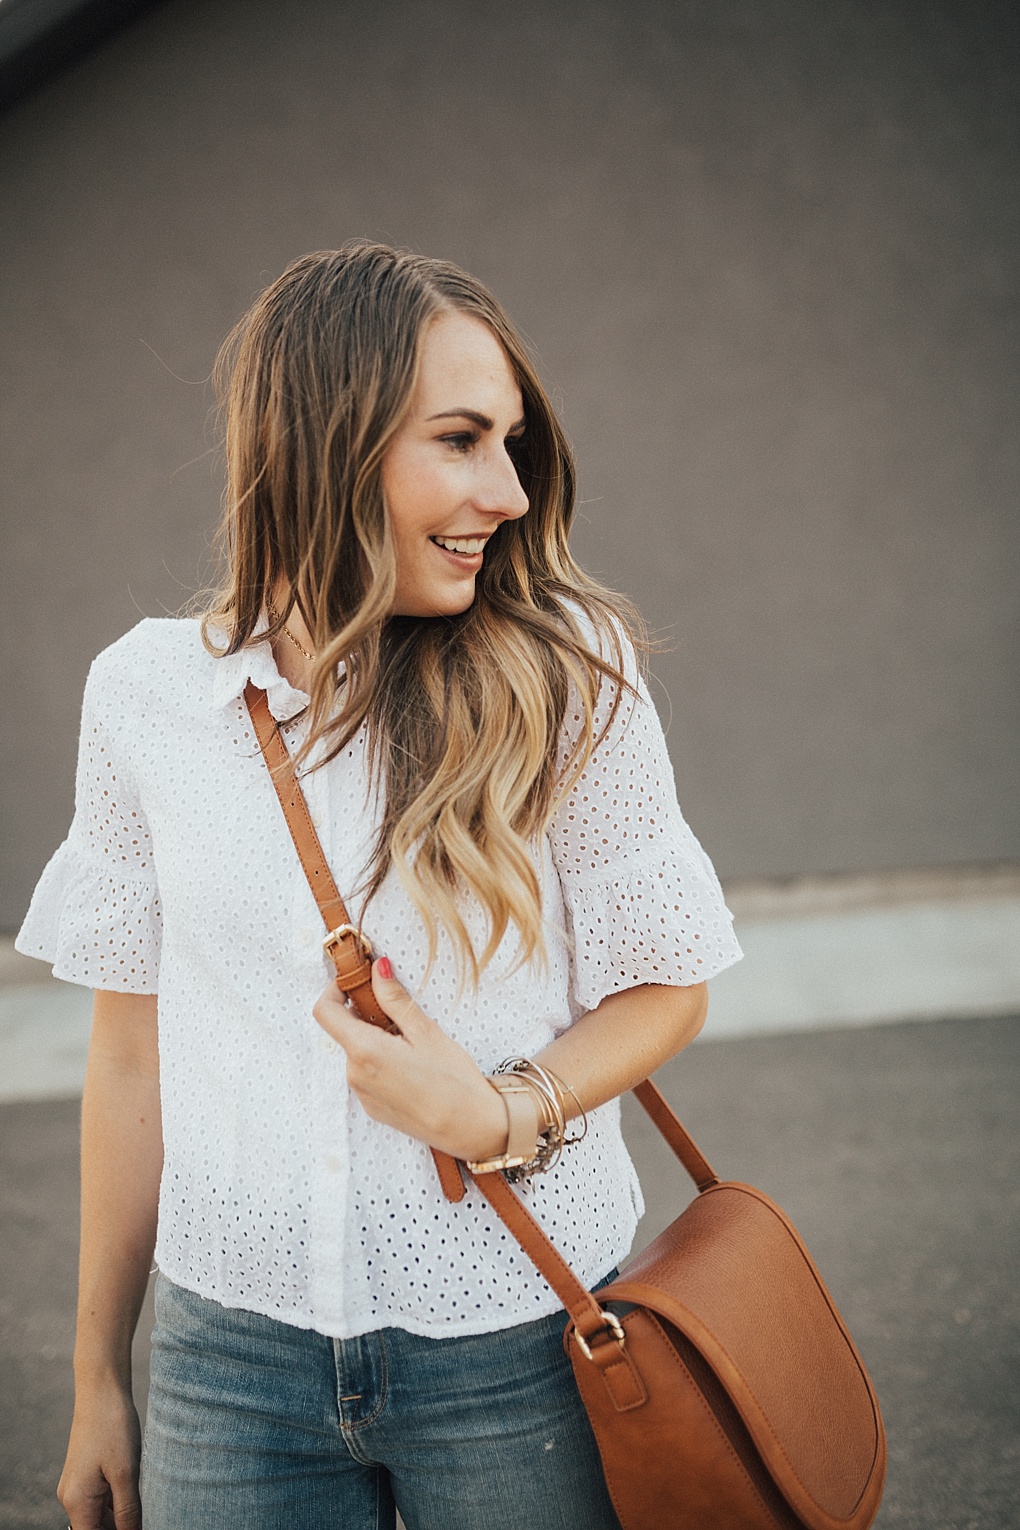 A Cute Eyelet Top To Dress Your Jeans Up by Utah fashion blogger Dani Marie